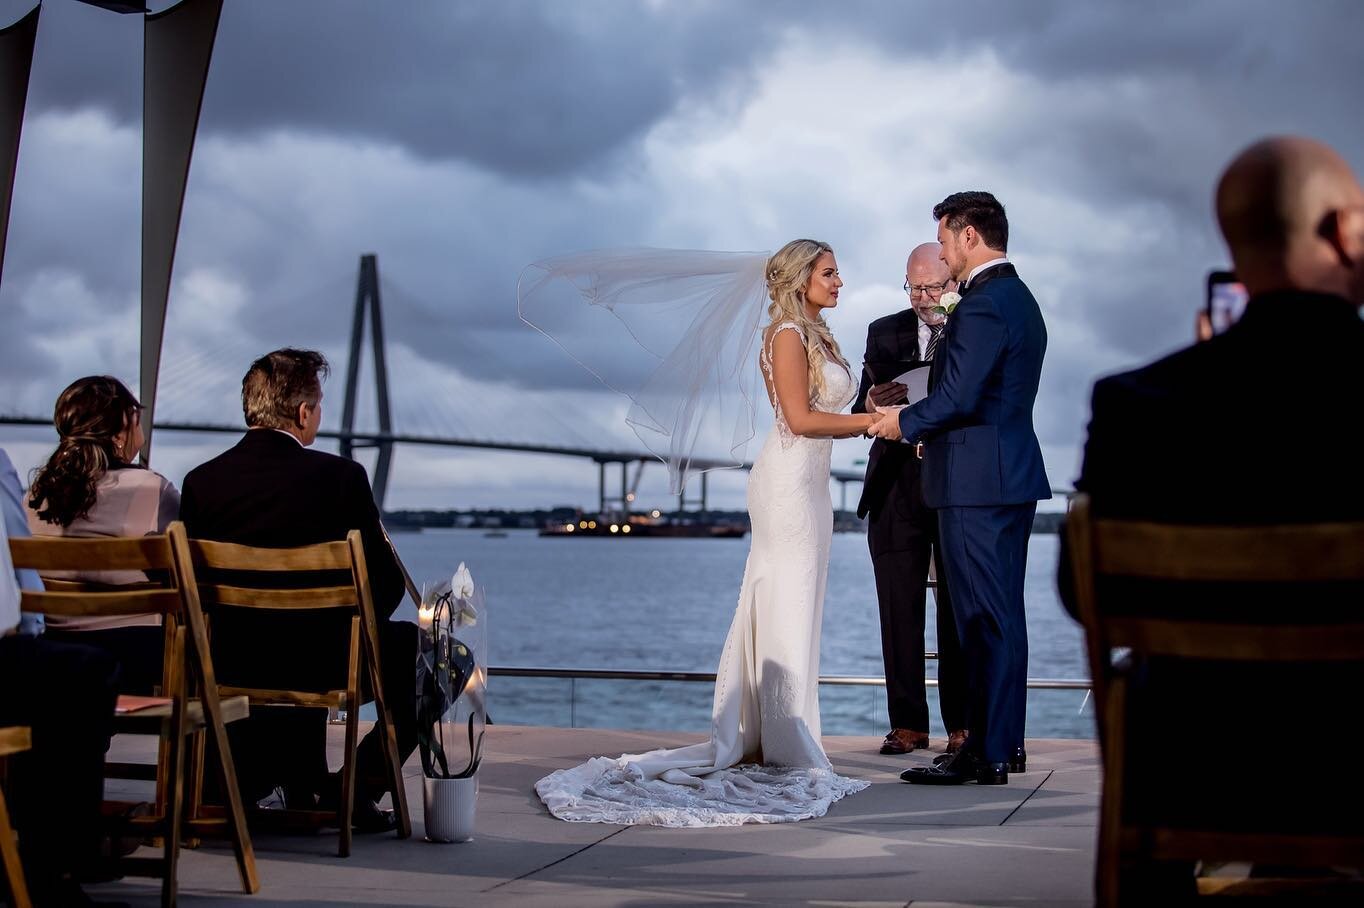 Just one short month ago, Holly and Glenn had a beautiful intimate ceremony in front of their closest family and friends! The rain cleared at just the perfect time, but left behind some beautiful, dramatic clouds 😍 and right on cue, as they were pro